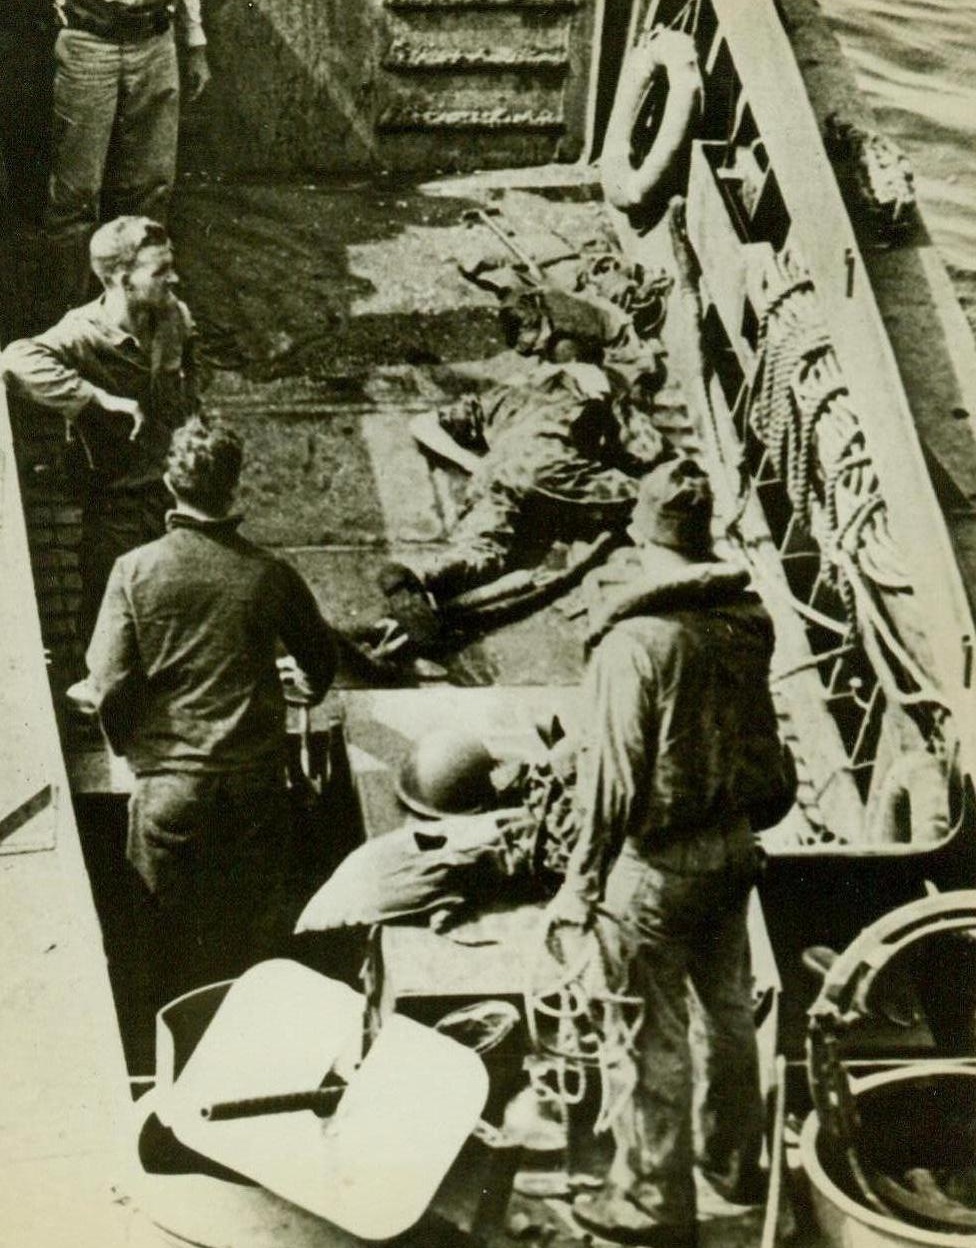 Landing Casualty, 11/15/1943. Bougainville -- A U.S. Marine lies crumpled in the bottom of a landing barge, which is on its way back to the transport after landing troops on Bougainville Island -- One of the toughest landings in the Solomons campaign. The wounded man was hit when the first Marines hit the beach. 11/15/43 (ACME);